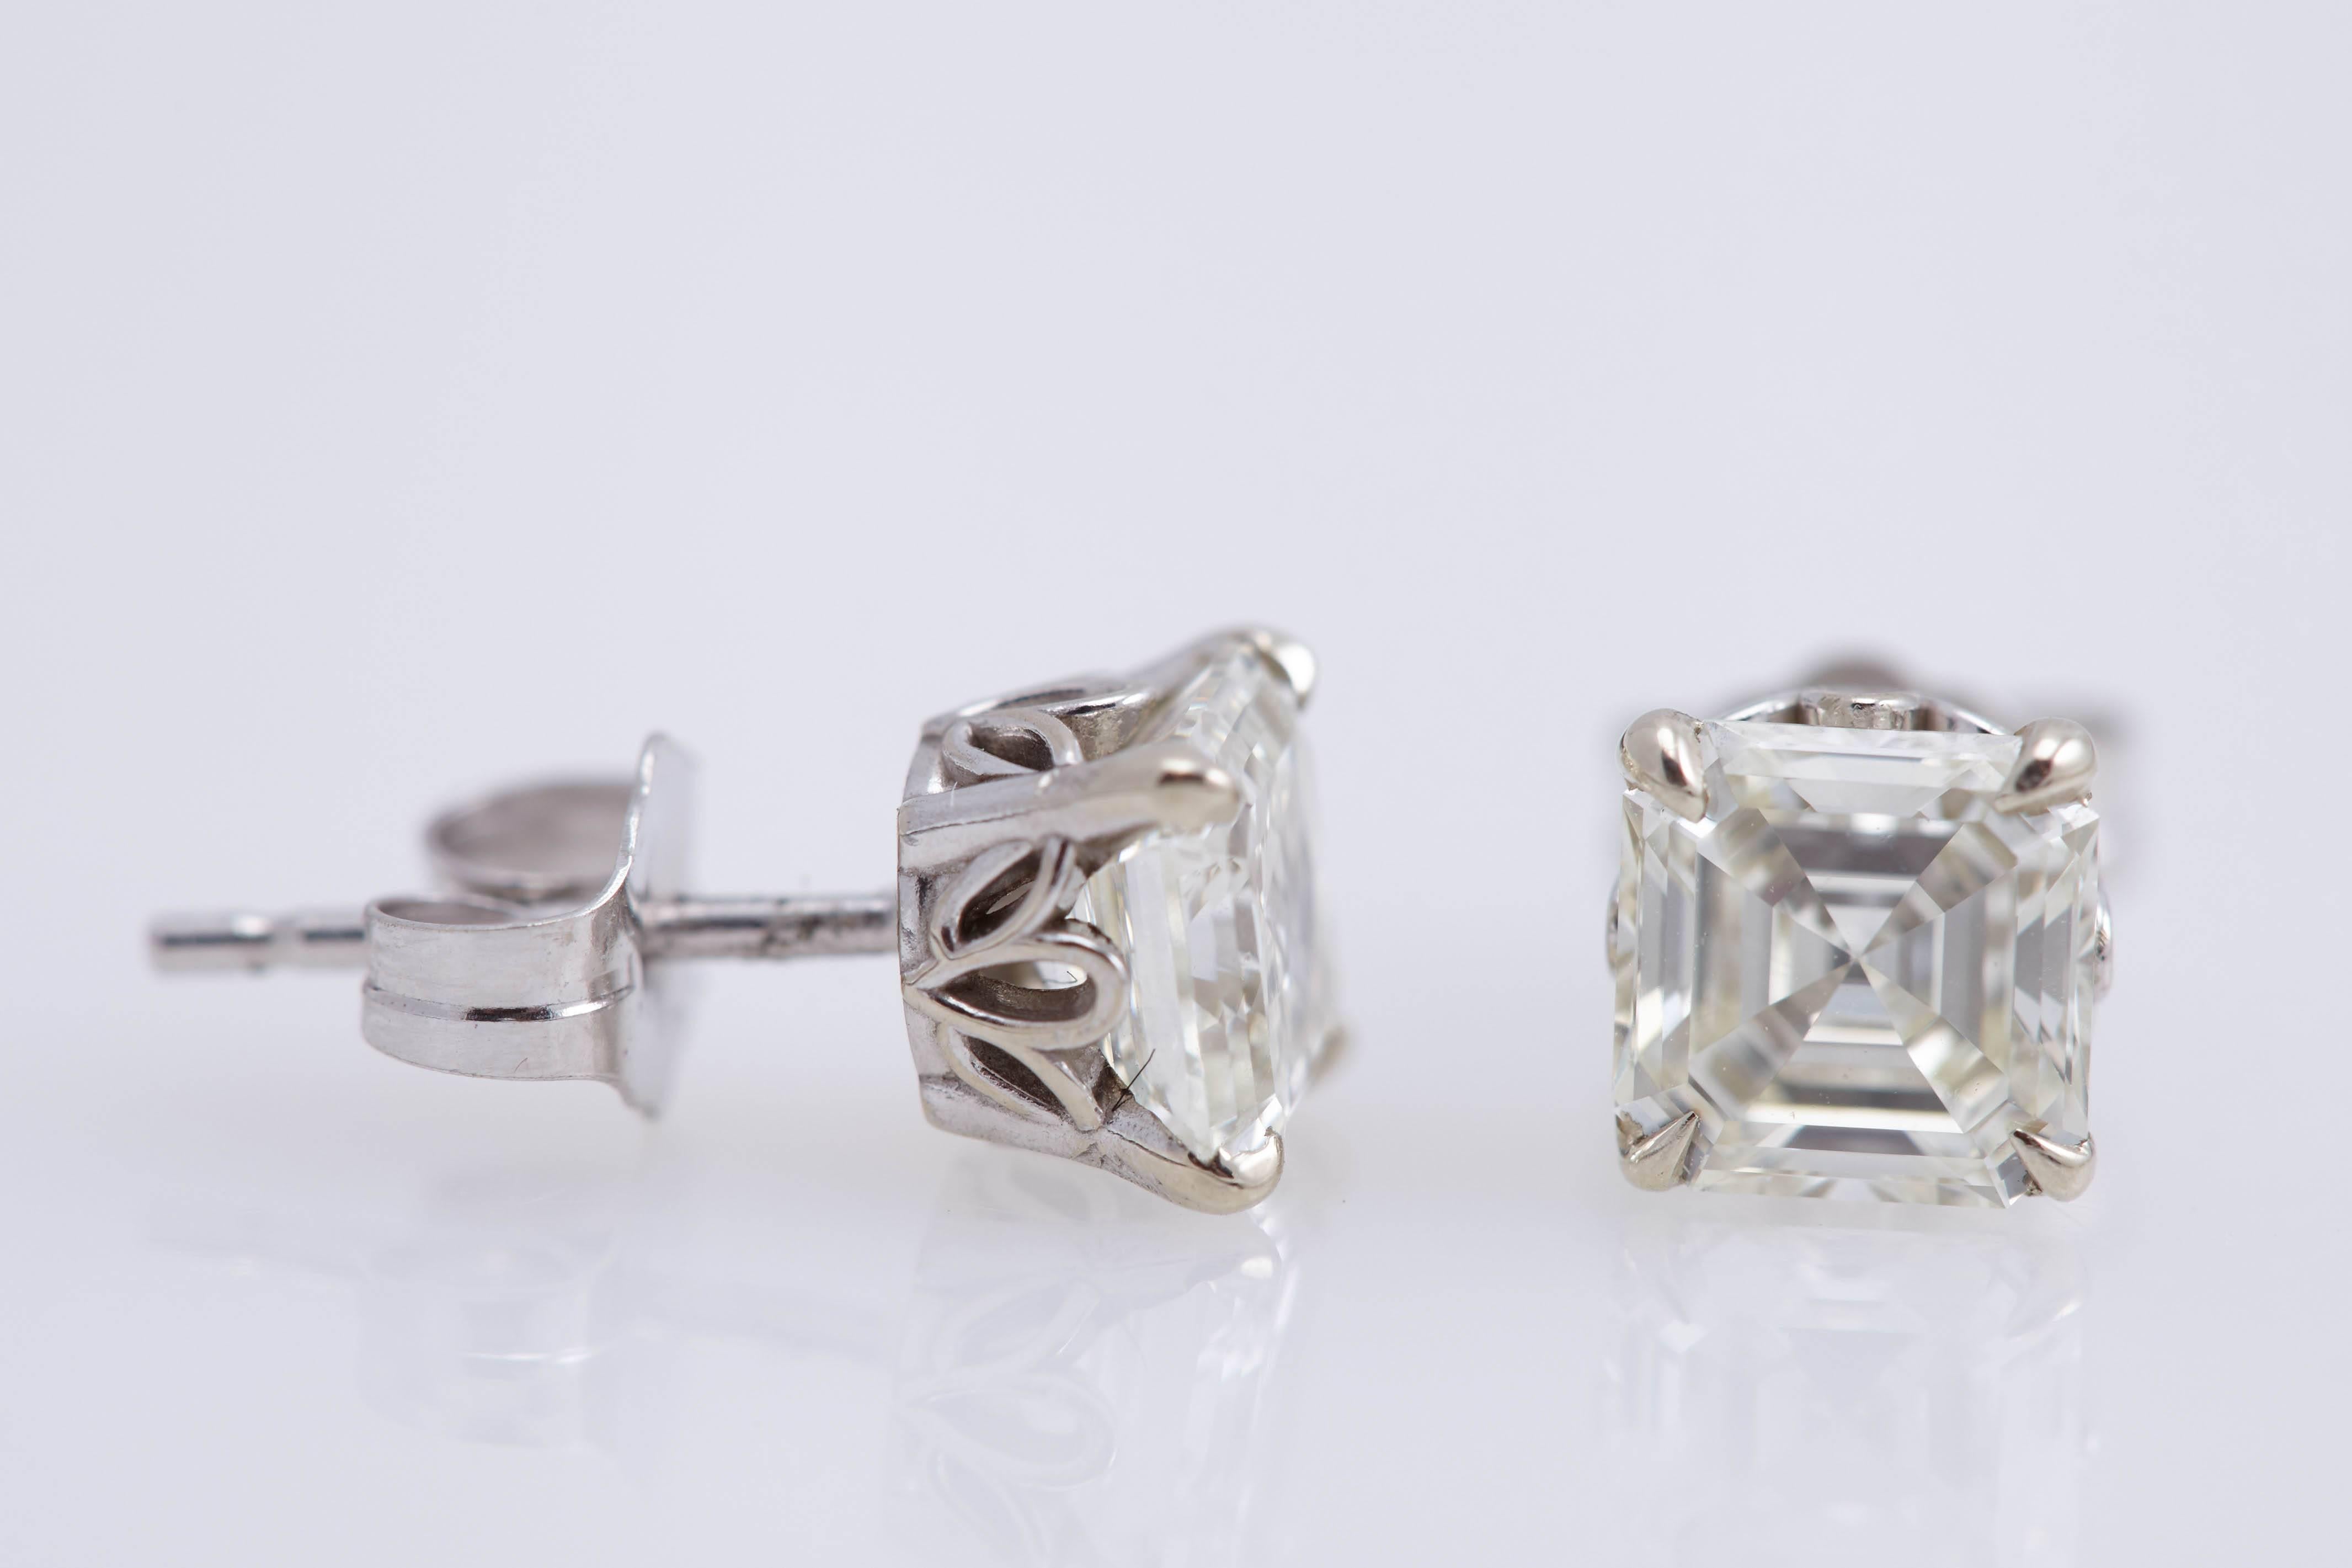 One pair of Asscher cut diamond earrings mounted in fourteen karat white gold. The diamonds have a total weight of approximately 1.68 carats. They are "I" in color and "VS" in clarity.